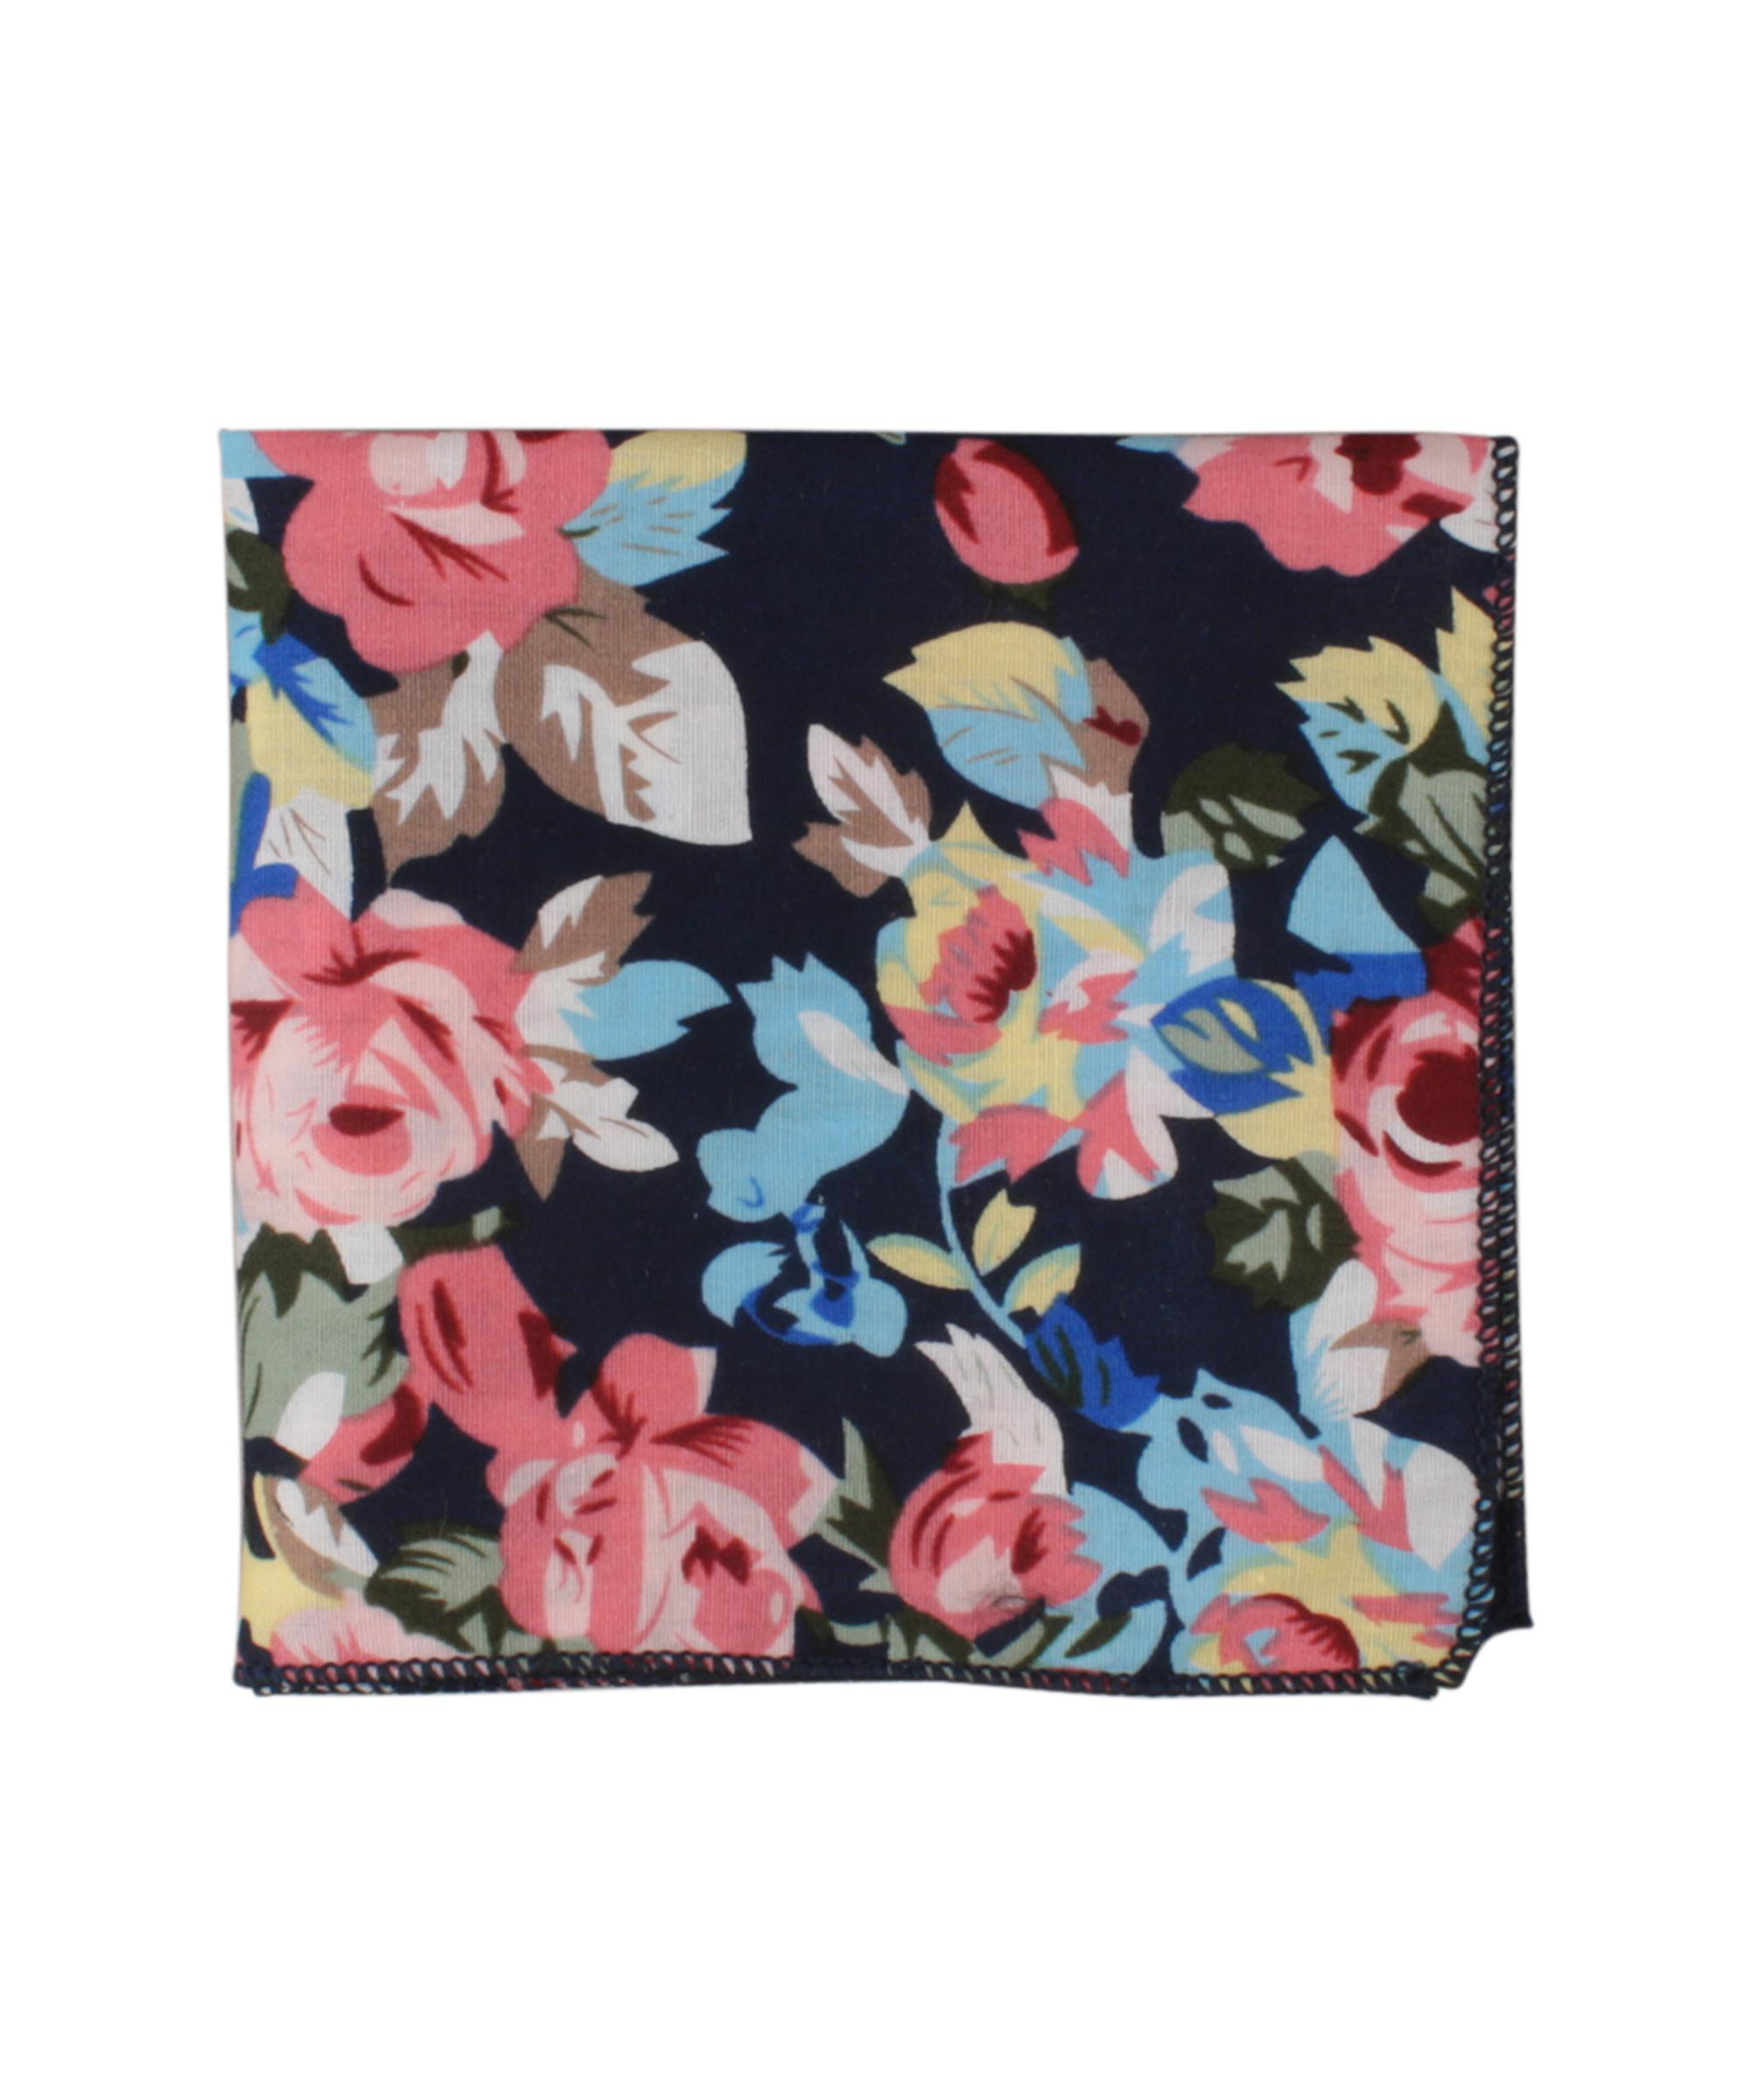 Blue Floral Pocket Square STELLA MYTIESHOP Navy Handkerchief Mytieshop Blue Floral Pocket Square Material CottonItem Length: 23 cm ( 9 inches)Item Width : 22 cm (8.6 inches) Color: Dark Blue Great for: Groom Groomsmen Wedding Shoots Formal Prom Fancy Parties Gifts and presents